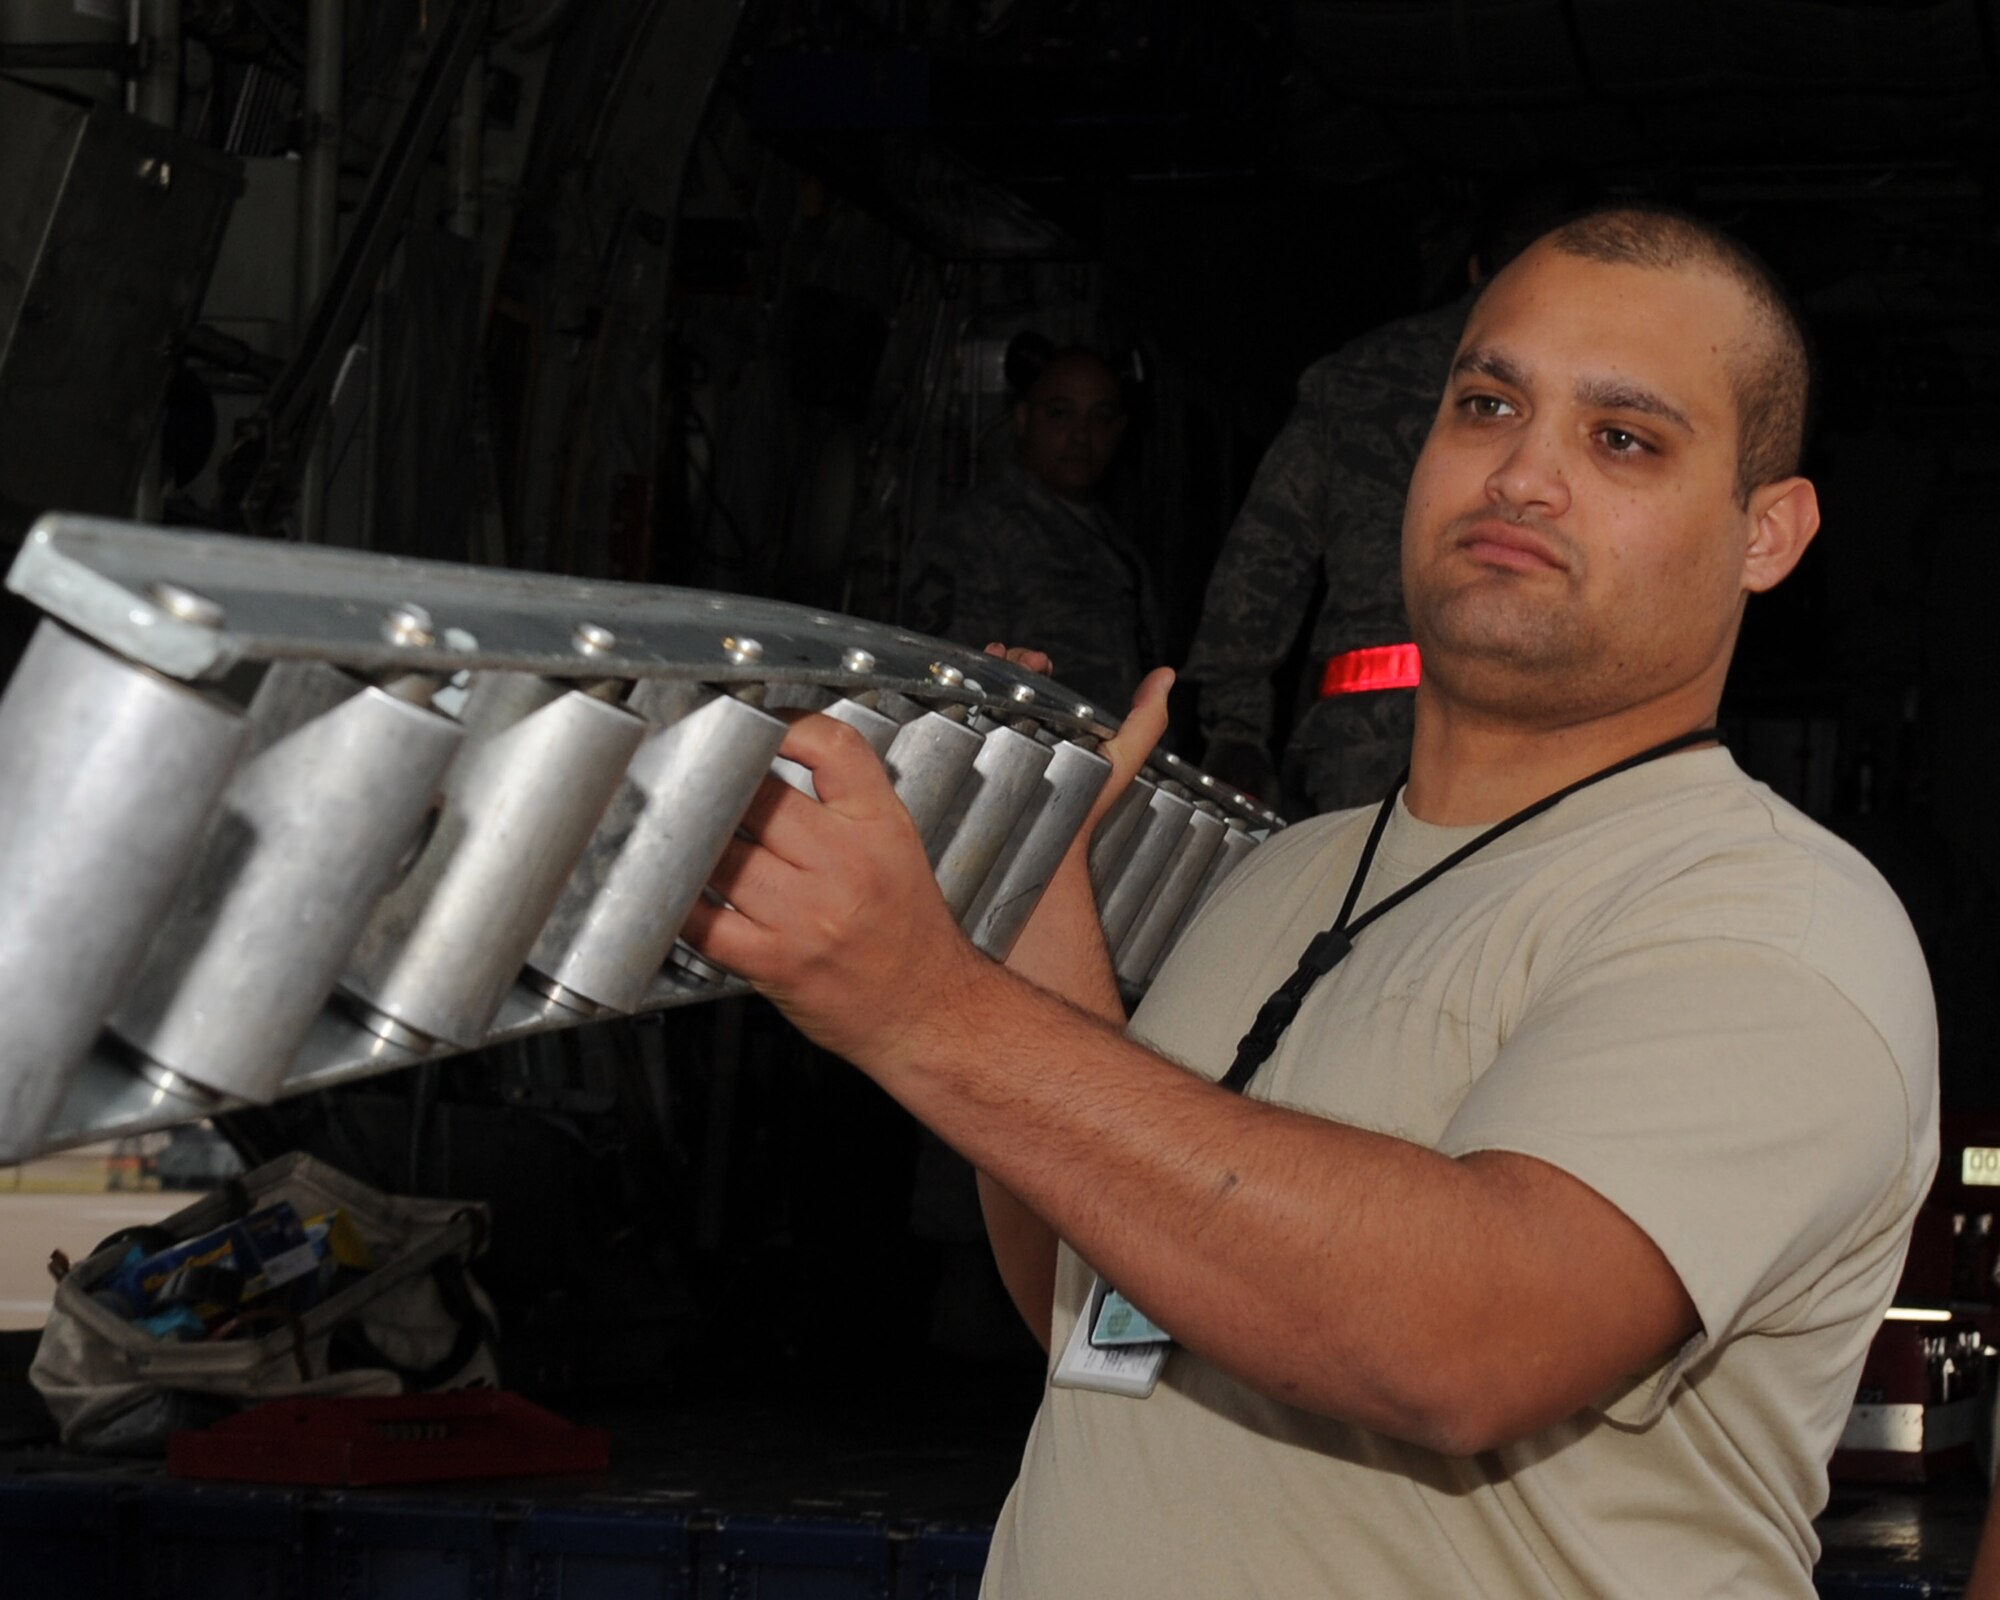 Senior Airman Michael Albert, a 314th Aircraft Maintenance Squadron dual rail specialist, removes a section of the cargo rail system from the Blue Angels C-130T Hercules nicknamed “Fat Albert” Dec. 16, 2011, at Little Rock Air Force Base, Ark. The 314th duel rail shop has worked on “Fat Albert” for over 10 years preparing the aircraft for the team’s demonstration season.   The Blue Angels will headline the open house and air show at Little Rock AFB scheduled for Sept.  8 and 9. (U.S. Air Force photo by Tech. Sgt. Chad Chisholm)